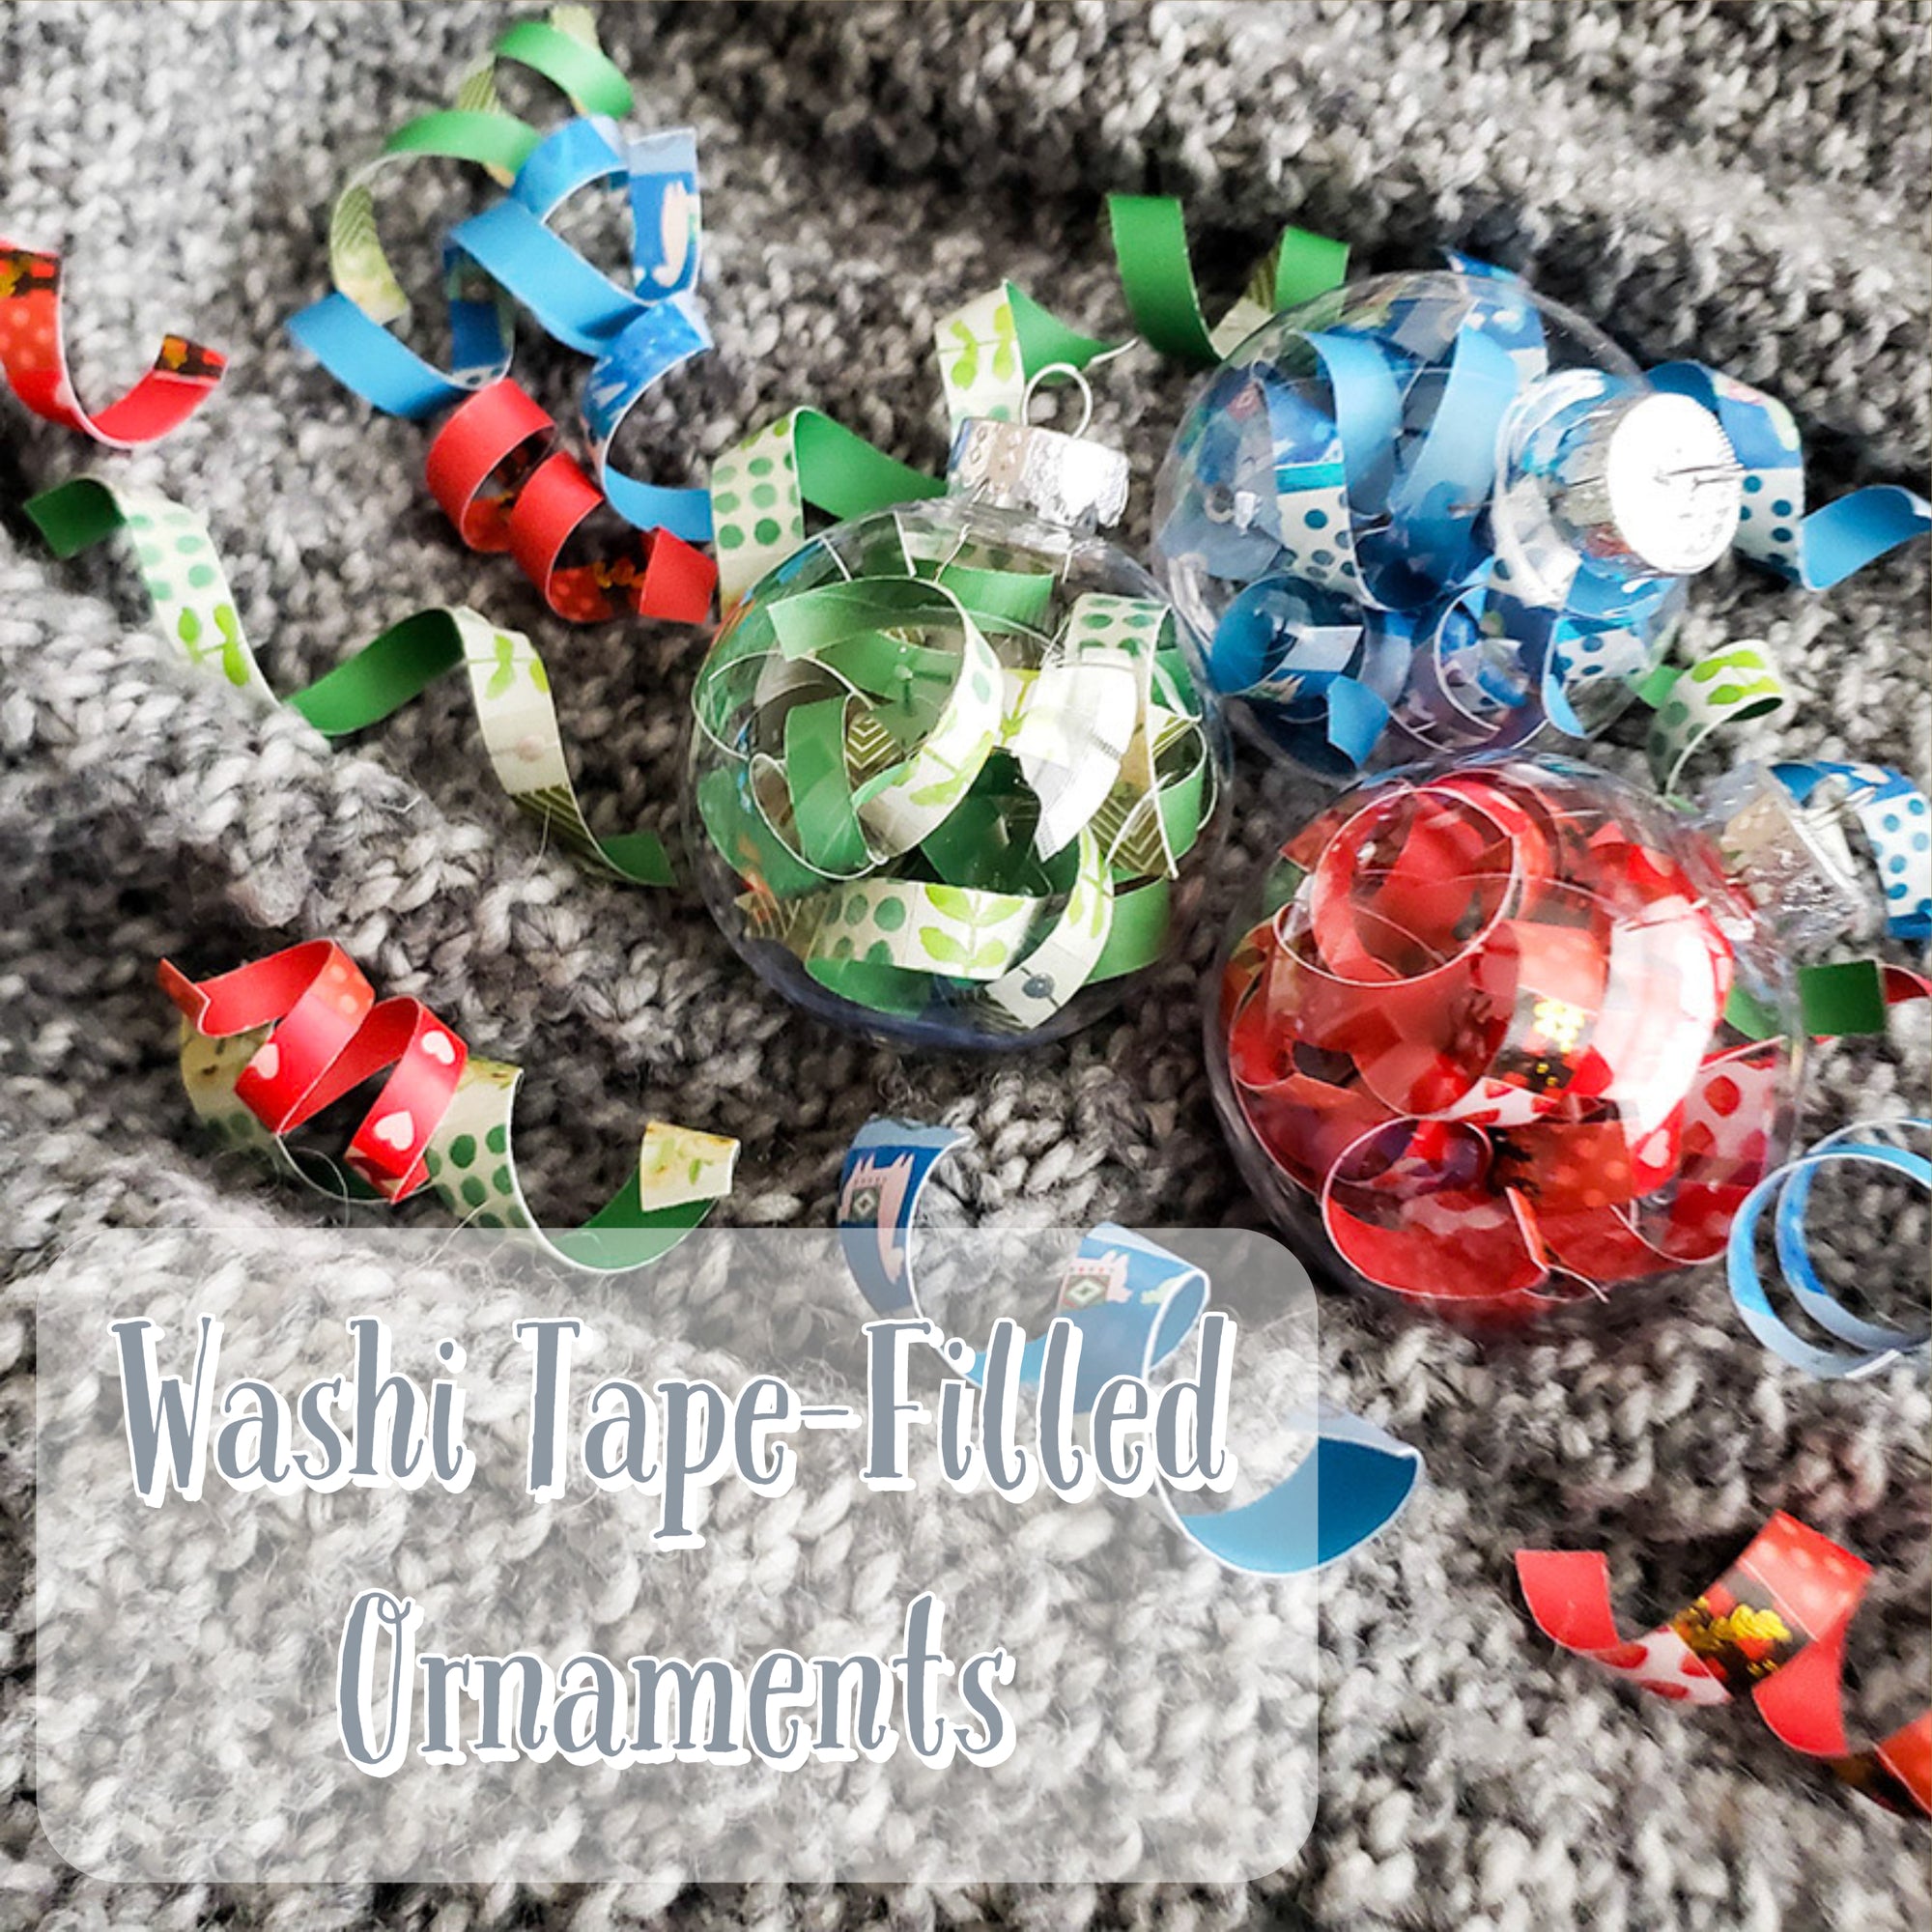 Washi Tape-Filled Ornaments